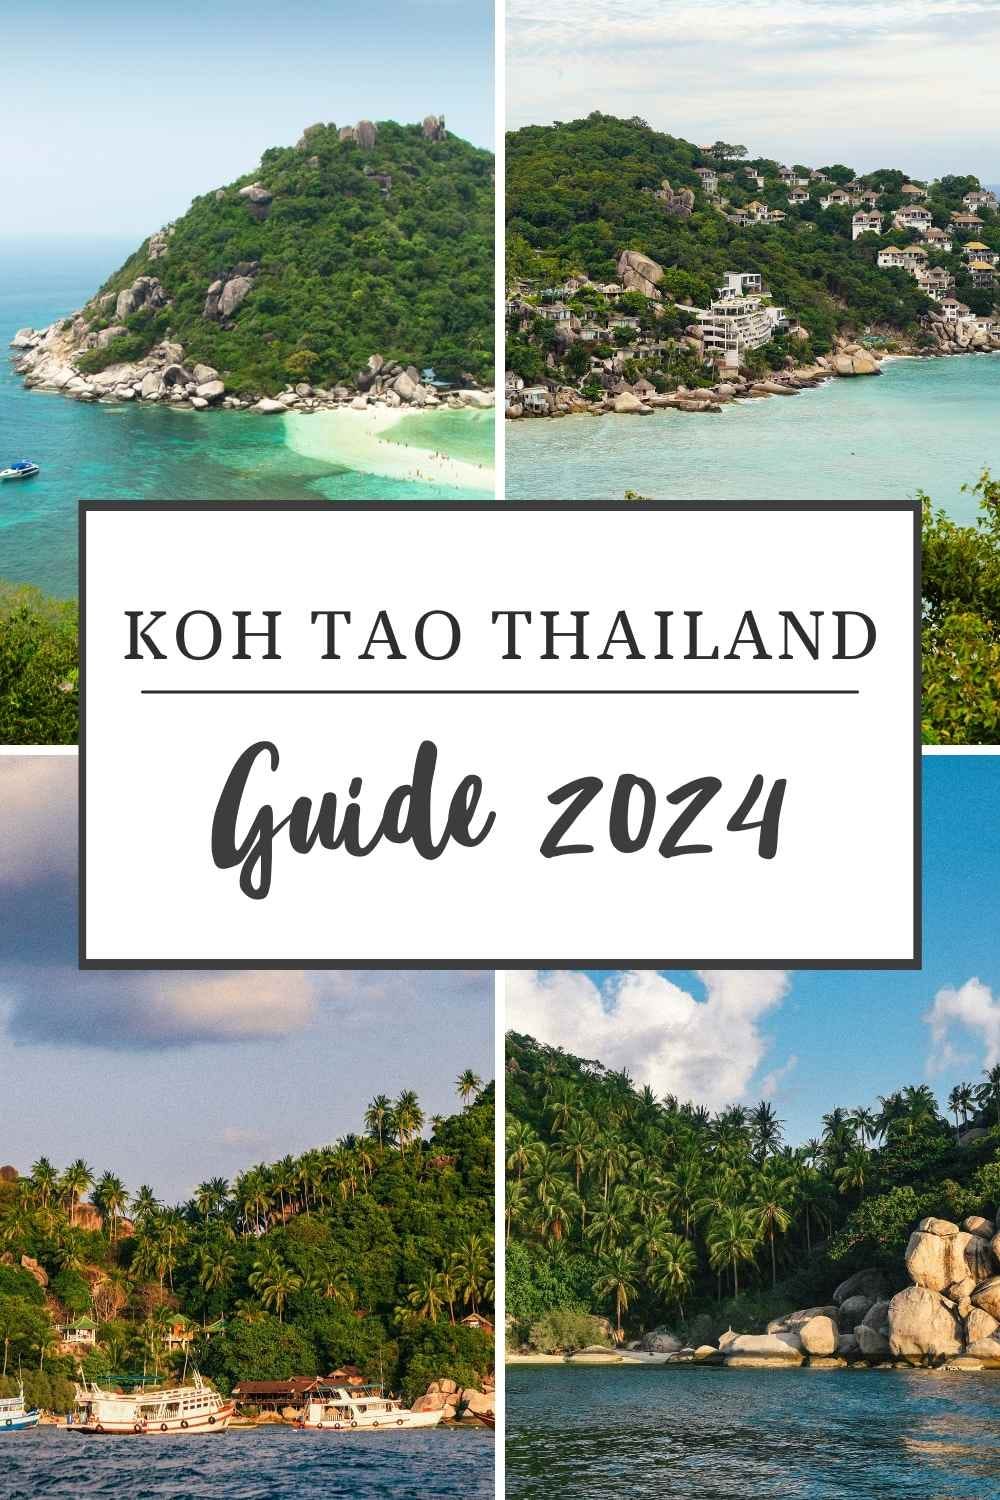 Game Fishing Koh Tao - All You Need to Know BEFORE You Go (2024)